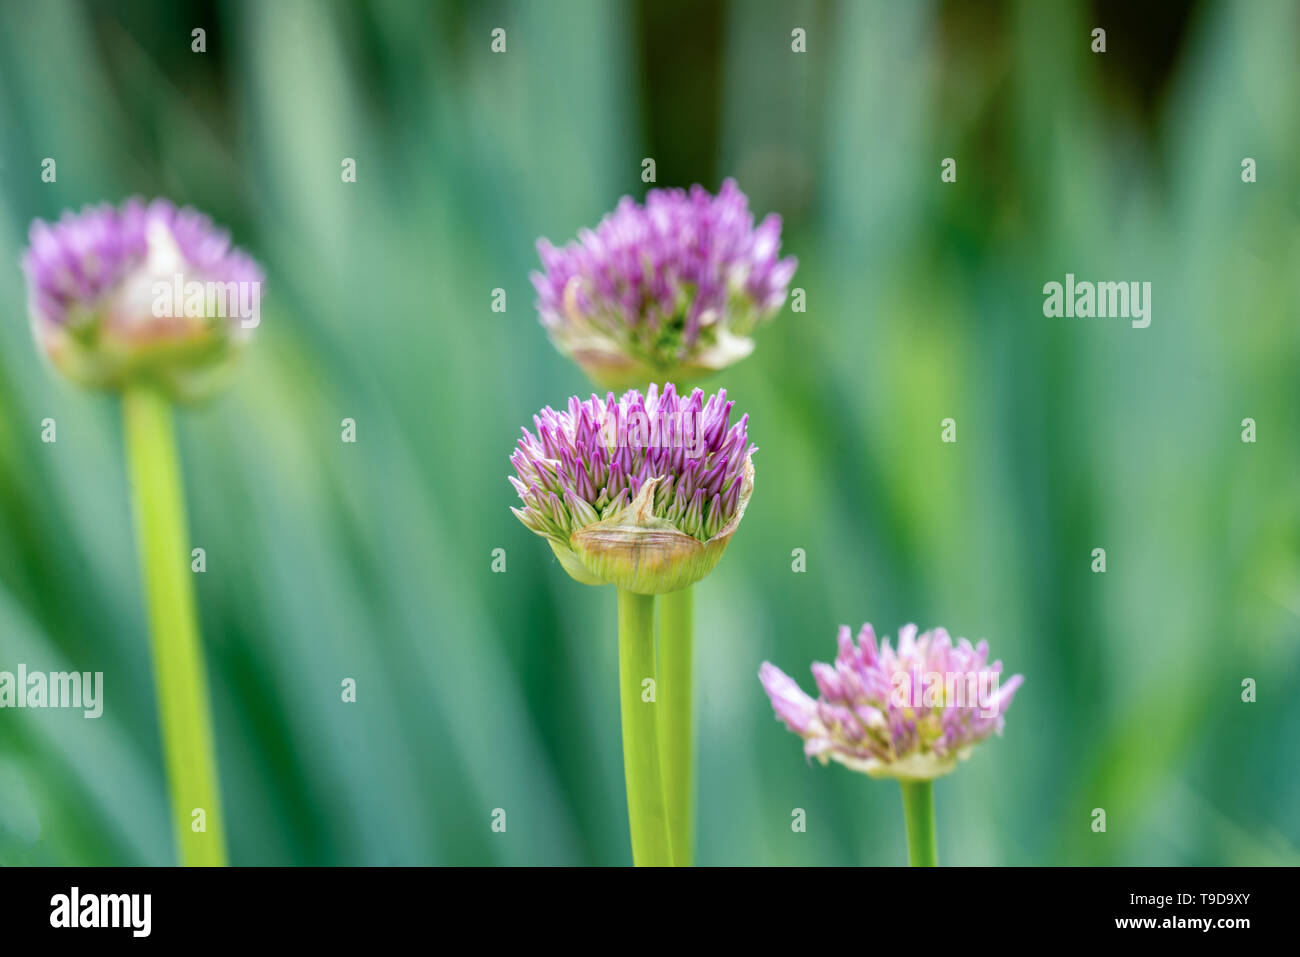 Macro close up of several isolated pink ornamental onion allium flower buds showing many details Stock Photo